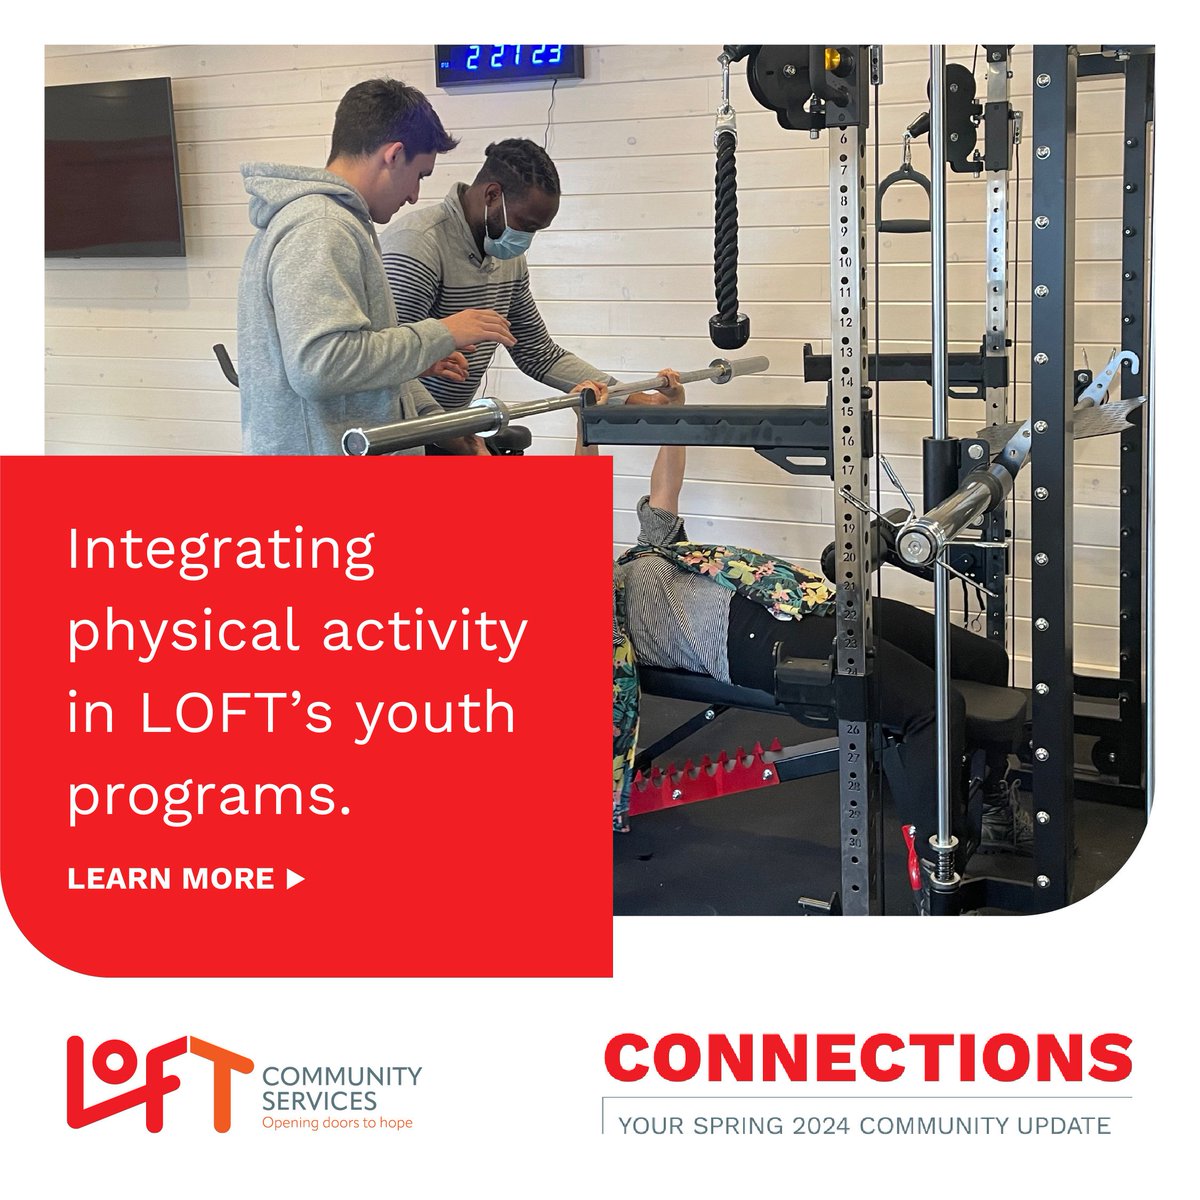 The gym at LOFT’s Beverley Lodge, a youth housing program, has helped clients improve their physical and mental health for over a year. Read on at: ow.ly/knzu50RaTc6. #YouthMentalHealth #CommunitySupport #YouthSupport #InspiringChange #Active #HealthAndWellness